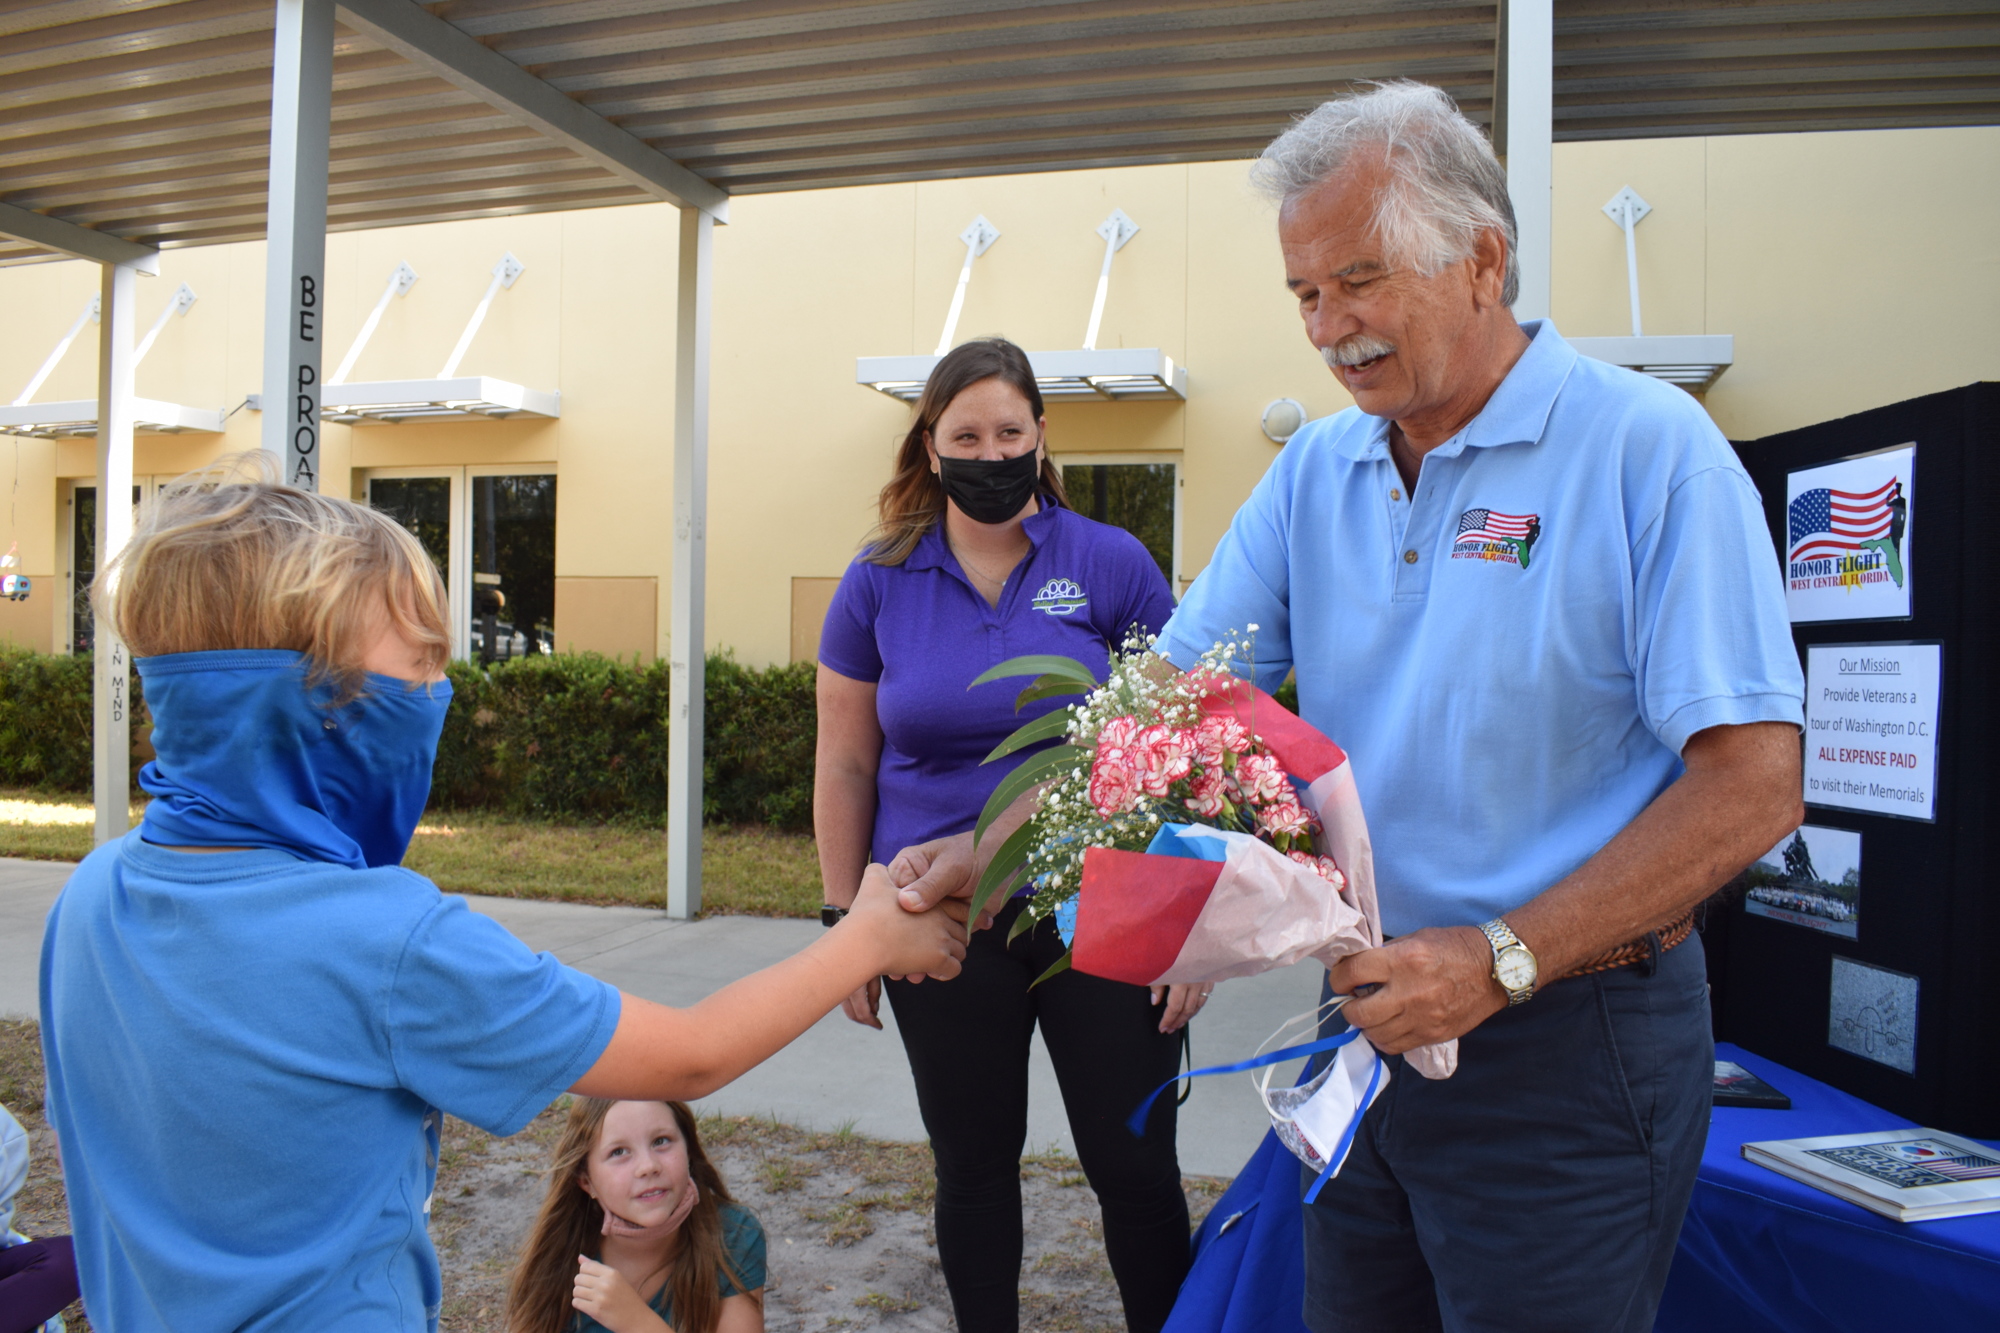 Fifth grader Colt Smith gives Gary Gilchrist, a director of Honor Flight of West Central Florida, a bouquet of flowers.